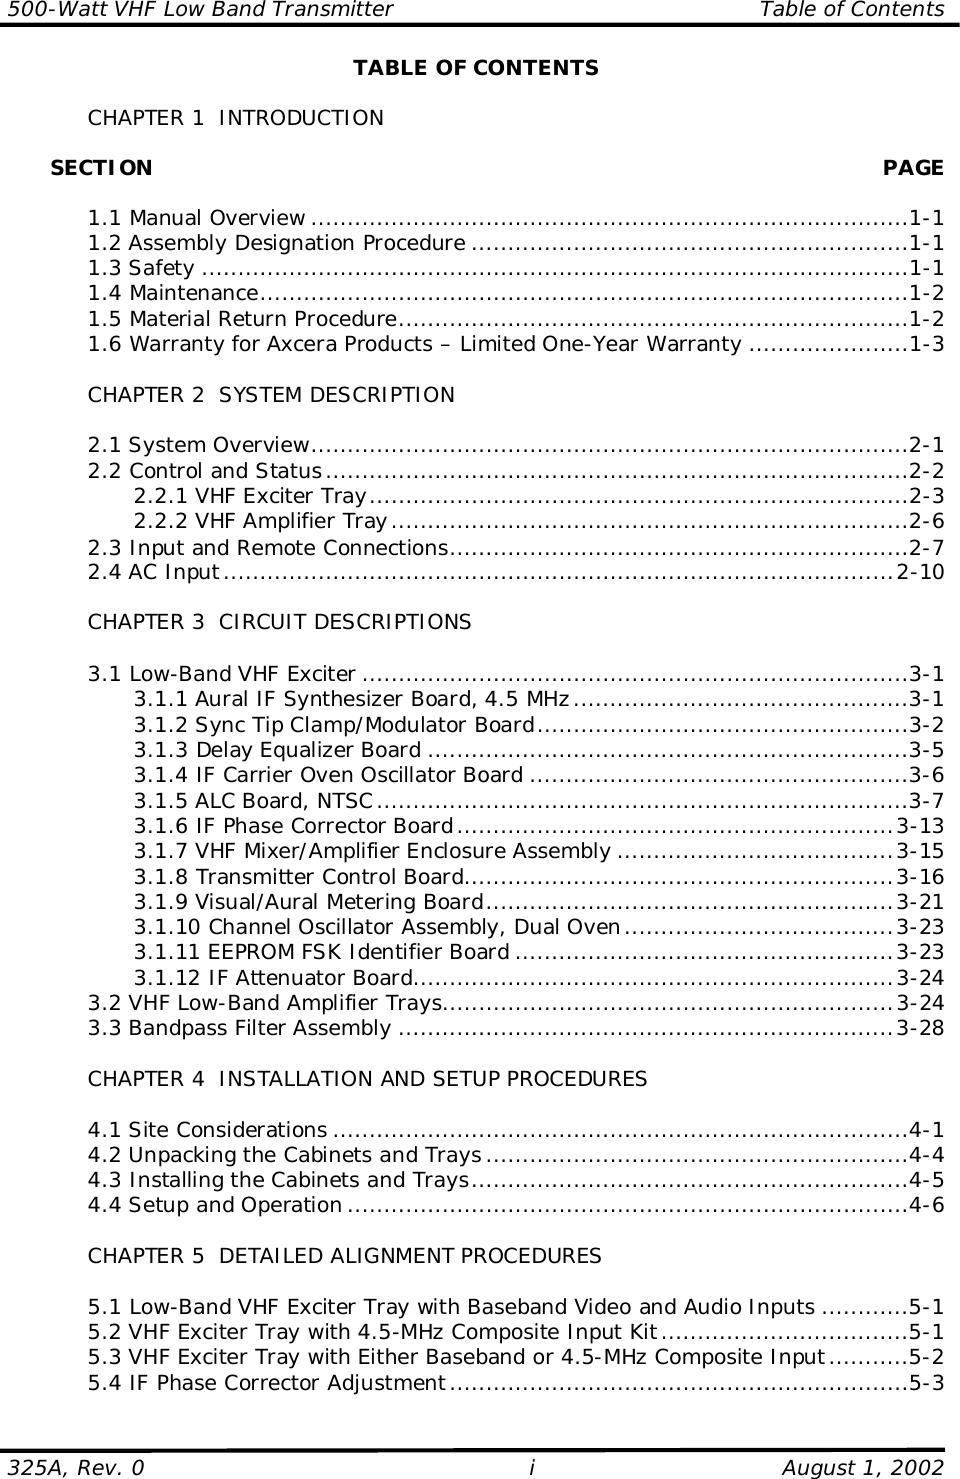 500-Watt VHF Low Band Transmitter                                                  Table of Contents325A, Rev. 0 i August 1, 2002TABLE OF CONTENTSCHAPTER 1  INTRODUCTION      SECTION PAGE1.1 Manual Overview ..................................................................................1-11.2 Assembly Designation Procedure ............................................................1-11.3 Safety .................................................................................................1-11.4 Maintenance.........................................................................................1-21.5 Material Return Procedure......................................................................1-21.6 Warranty for Axcera Products – Limited One-Year Warranty ......................1-3CHAPTER 2  SYSTEM DESCRIPTION2.1 System Overview..................................................................................2-12.2 Control and Status................................................................................2-22.2.1 VHF Exciter Tray..........................................................................2-32.2.2 VHF Amplifier Tray.......................................................................2-62.3 Input and Remote Connections...............................................................2-72.4 AC Input............................................................................................2-10CHAPTER 3  CIRCUIT DESCRIPTIONS3.1 Low-Band VHF Exciter ...........................................................................3-13.1.1 Aural IF Synthesizer Board, 4.5 MHz..............................................3-13.1.2 Sync Tip Clamp/Modulator Board...................................................3-23.1.3 Delay Equalizer Board ..................................................................3-53.1.4 IF Carrier Oven Oscillator Board ....................................................3-63.1.5 ALC Board, NTSC.........................................................................3-73.1.6 IF Phase Corrector Board............................................................3-133.1.7 VHF Mixer/Amplifier Enclosure Assembly ......................................3-153.1.8 Transmitter Control Board...........................................................3-163.1.9 Visual/Aural Metering Board........................................................3-213.1.10 Channel Oscillator Assembly, Dual Oven.....................................3-233.1.11 EEPROM FSK Identifier Board ....................................................3-233.1.12 IF Attenuator Board..................................................................3-243.2 VHF Low-Band Amplifier Trays..............................................................3-243.3 Bandpass Filter Assembly ....................................................................3-28CHAPTER 4  INSTALLATION AND SETUP PROCEDURES4.1 Site Considerations ...............................................................................4-14.2 Unpacking the Cabinets and Trays ..........................................................4-44.3 Installing the Cabinets and Trays............................................................4-54.4 Setup and Operation .............................................................................4-6CHAPTER 5  DETAILED ALIGNMENT PROCEDURES5.1 Low-Band VHF Exciter Tray with Baseband Video and Audio Inputs ............5-15.2 VHF Exciter Tray with 4.5-MHz Composite Input Kit..................................5-15.3 VHF Exciter Tray with Either Baseband or 4.5-MHz Composite Input...........5-25.4 IF Phase Corrector Adjustment...............................................................5-3